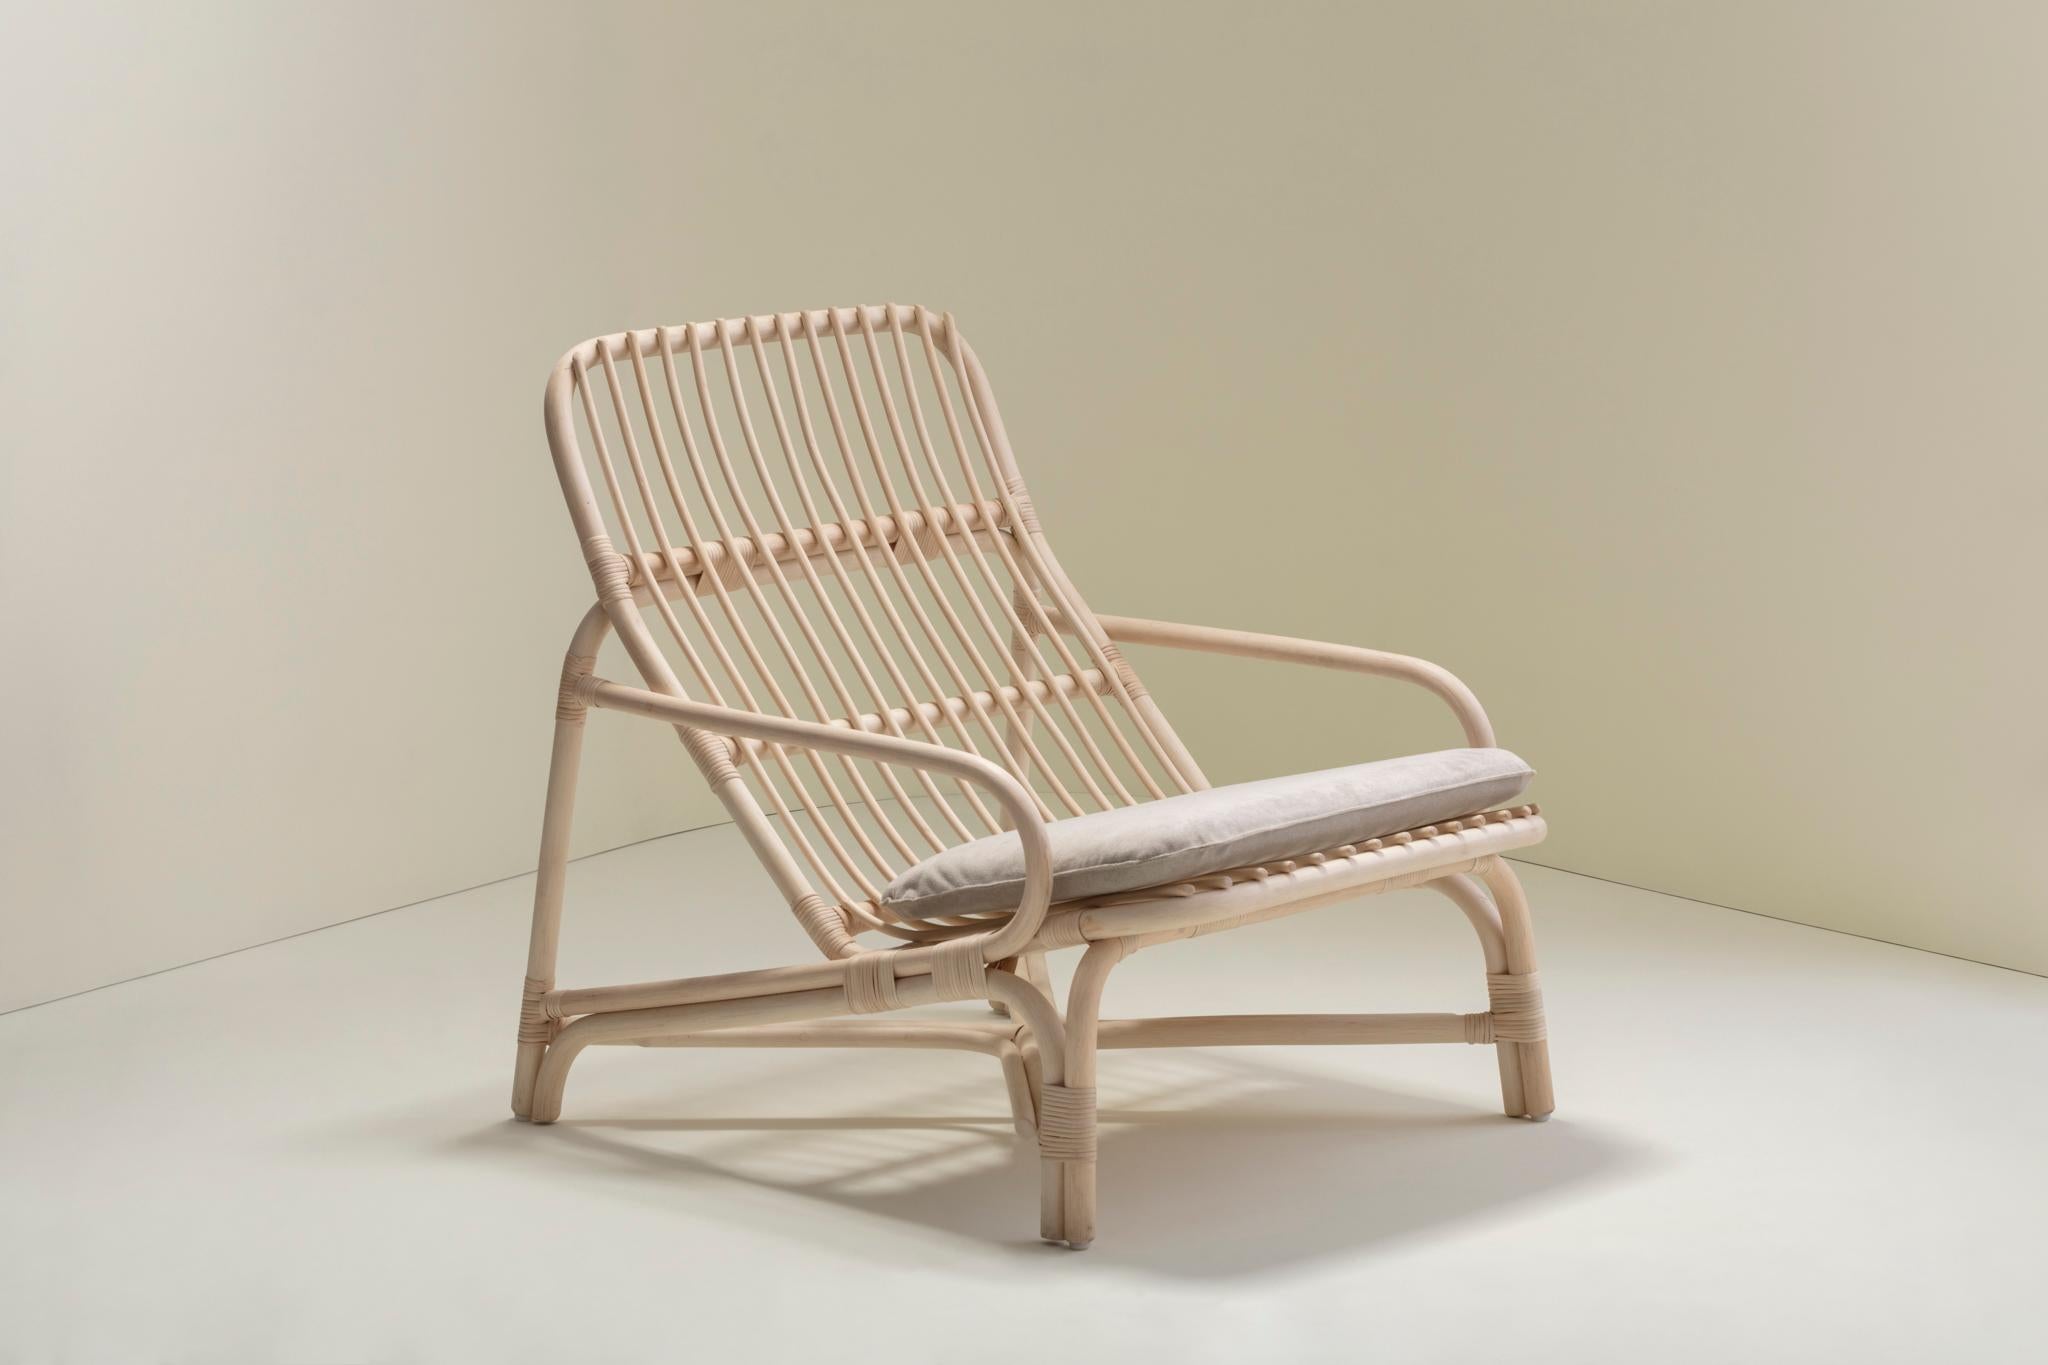 Camelia is a lounge chair carefully designed; its structure expresses all the qualities of natural rattan; its lightness, resistance and elegance, without sacrificing simplicity and functionality. 

Camelia takes inspiration from the great